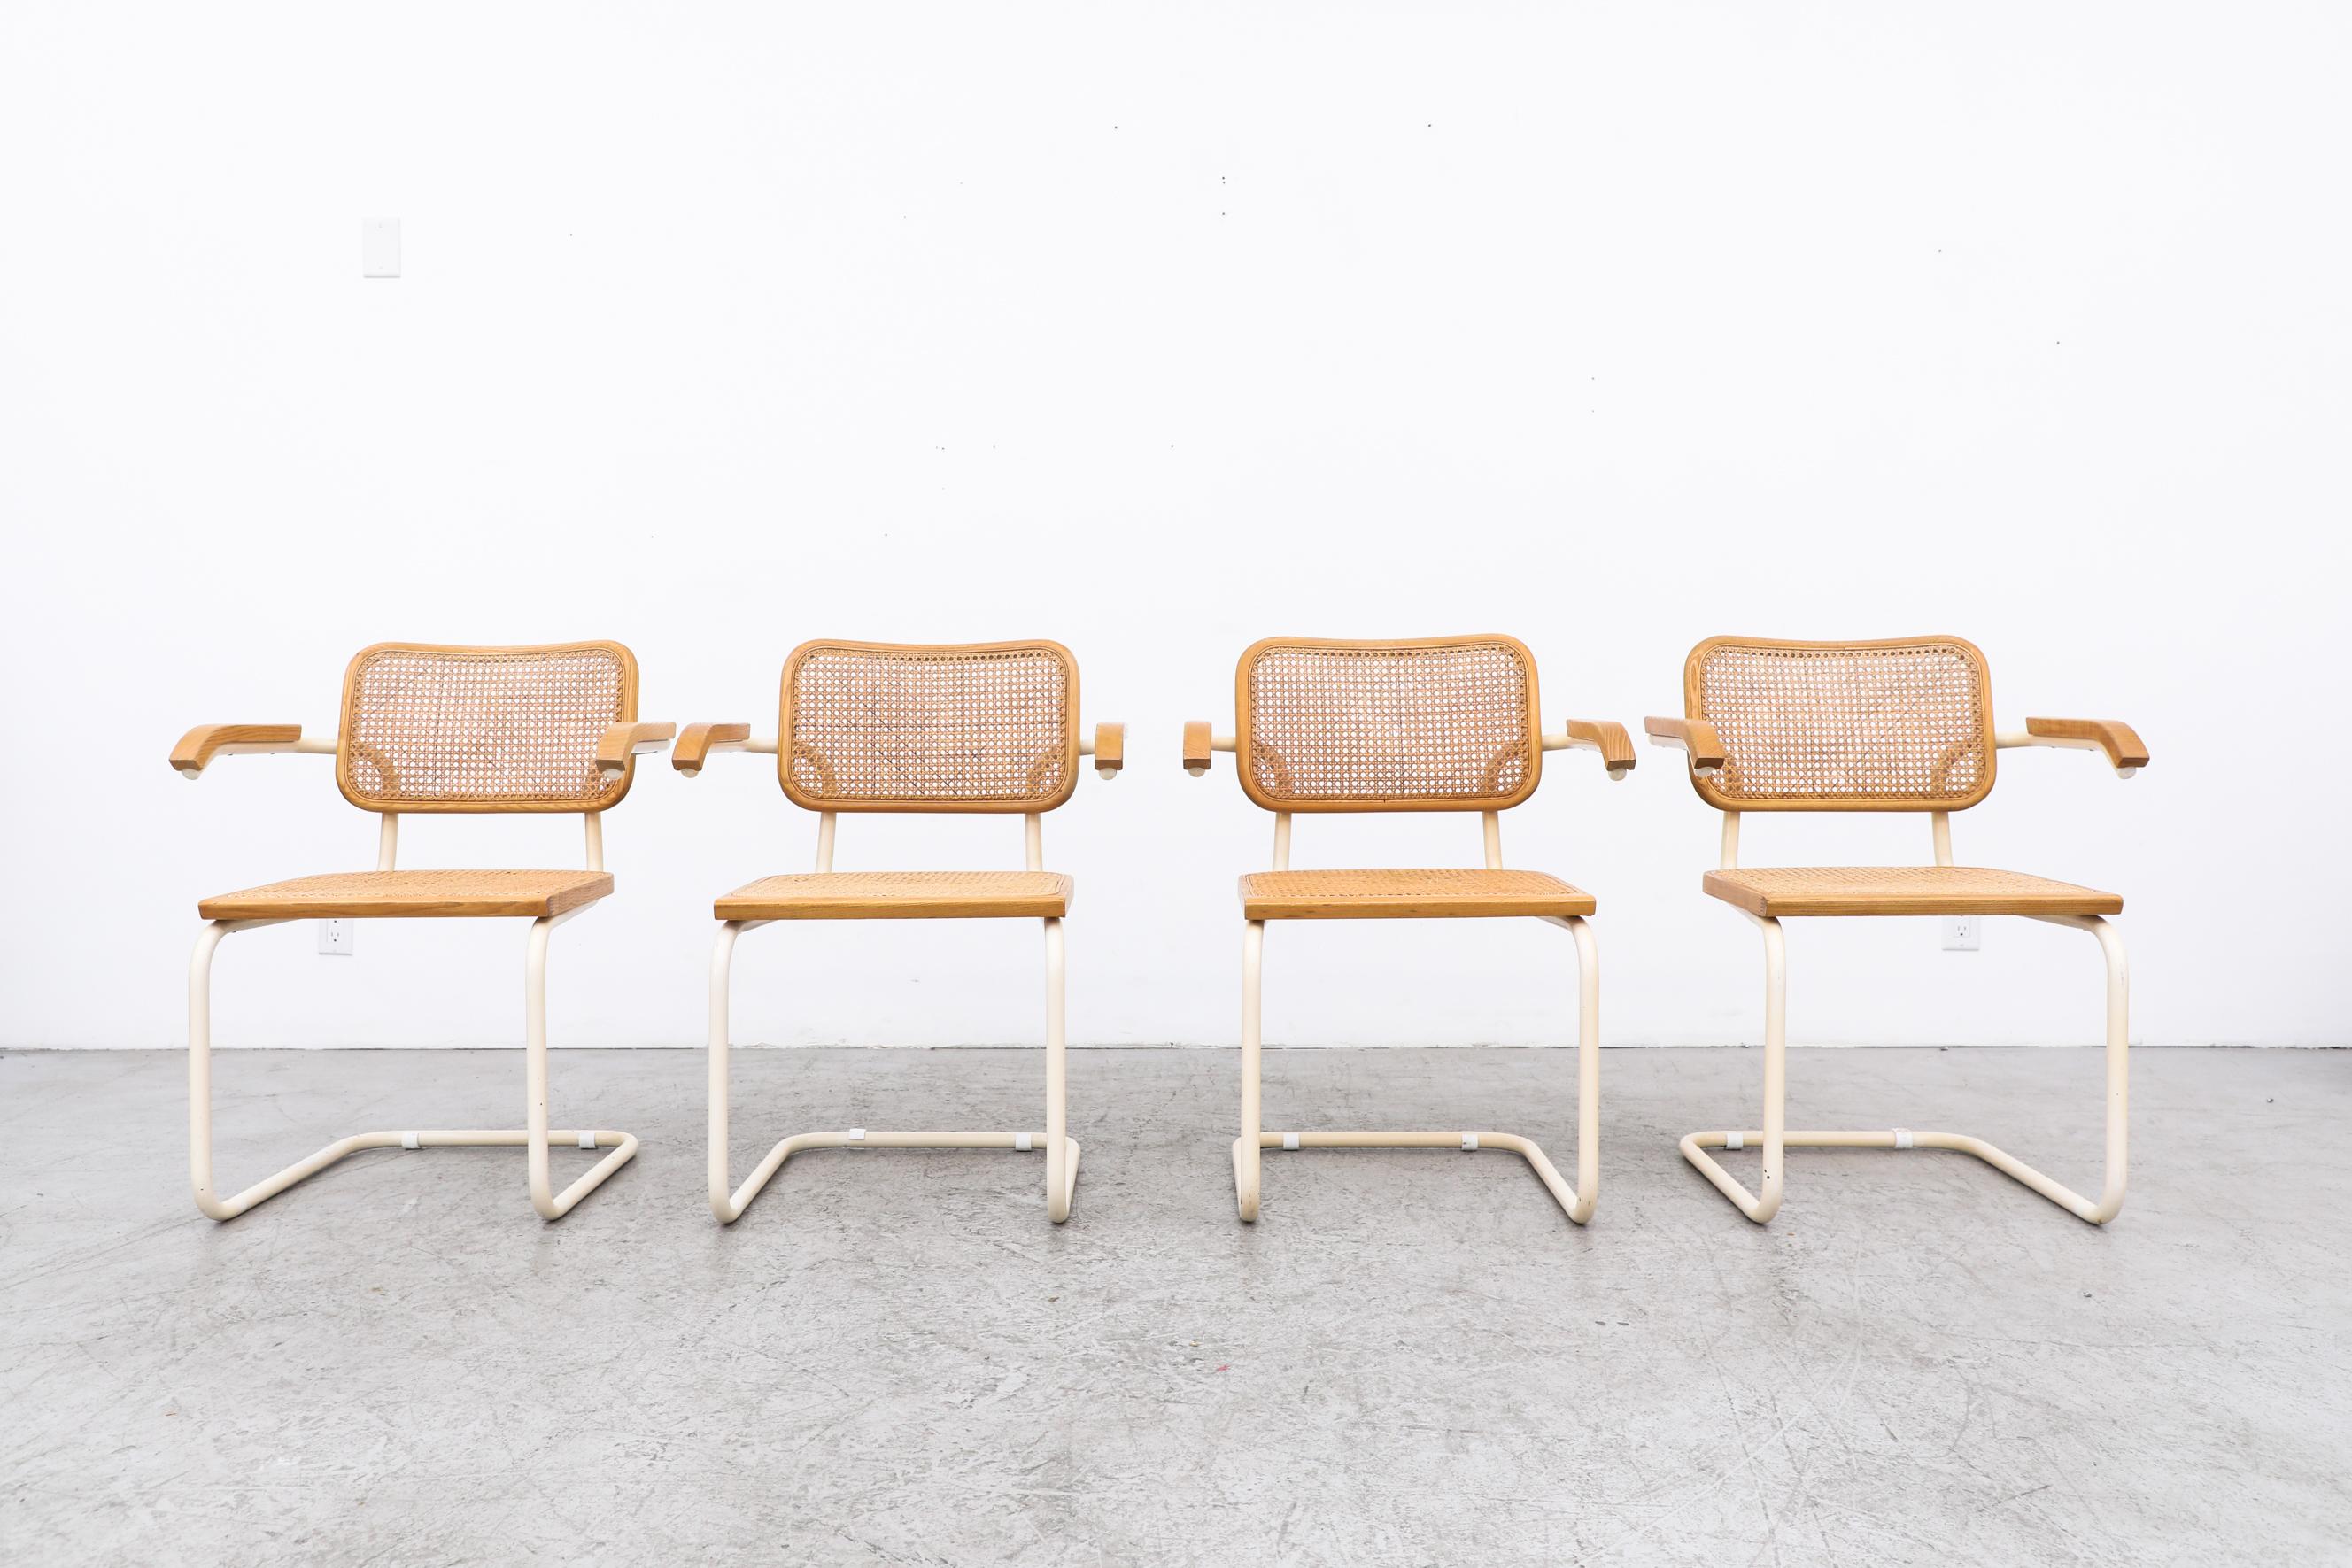 This set of 4 classic B64 Cesca Chairs, designed by famed design icon Marcel Breuer, was manufactured by Gavina in Italy circa 1960. Named 'Cesca' after Breuer's daughter Francesca, these light wood and cane armchairs have a white painted metal